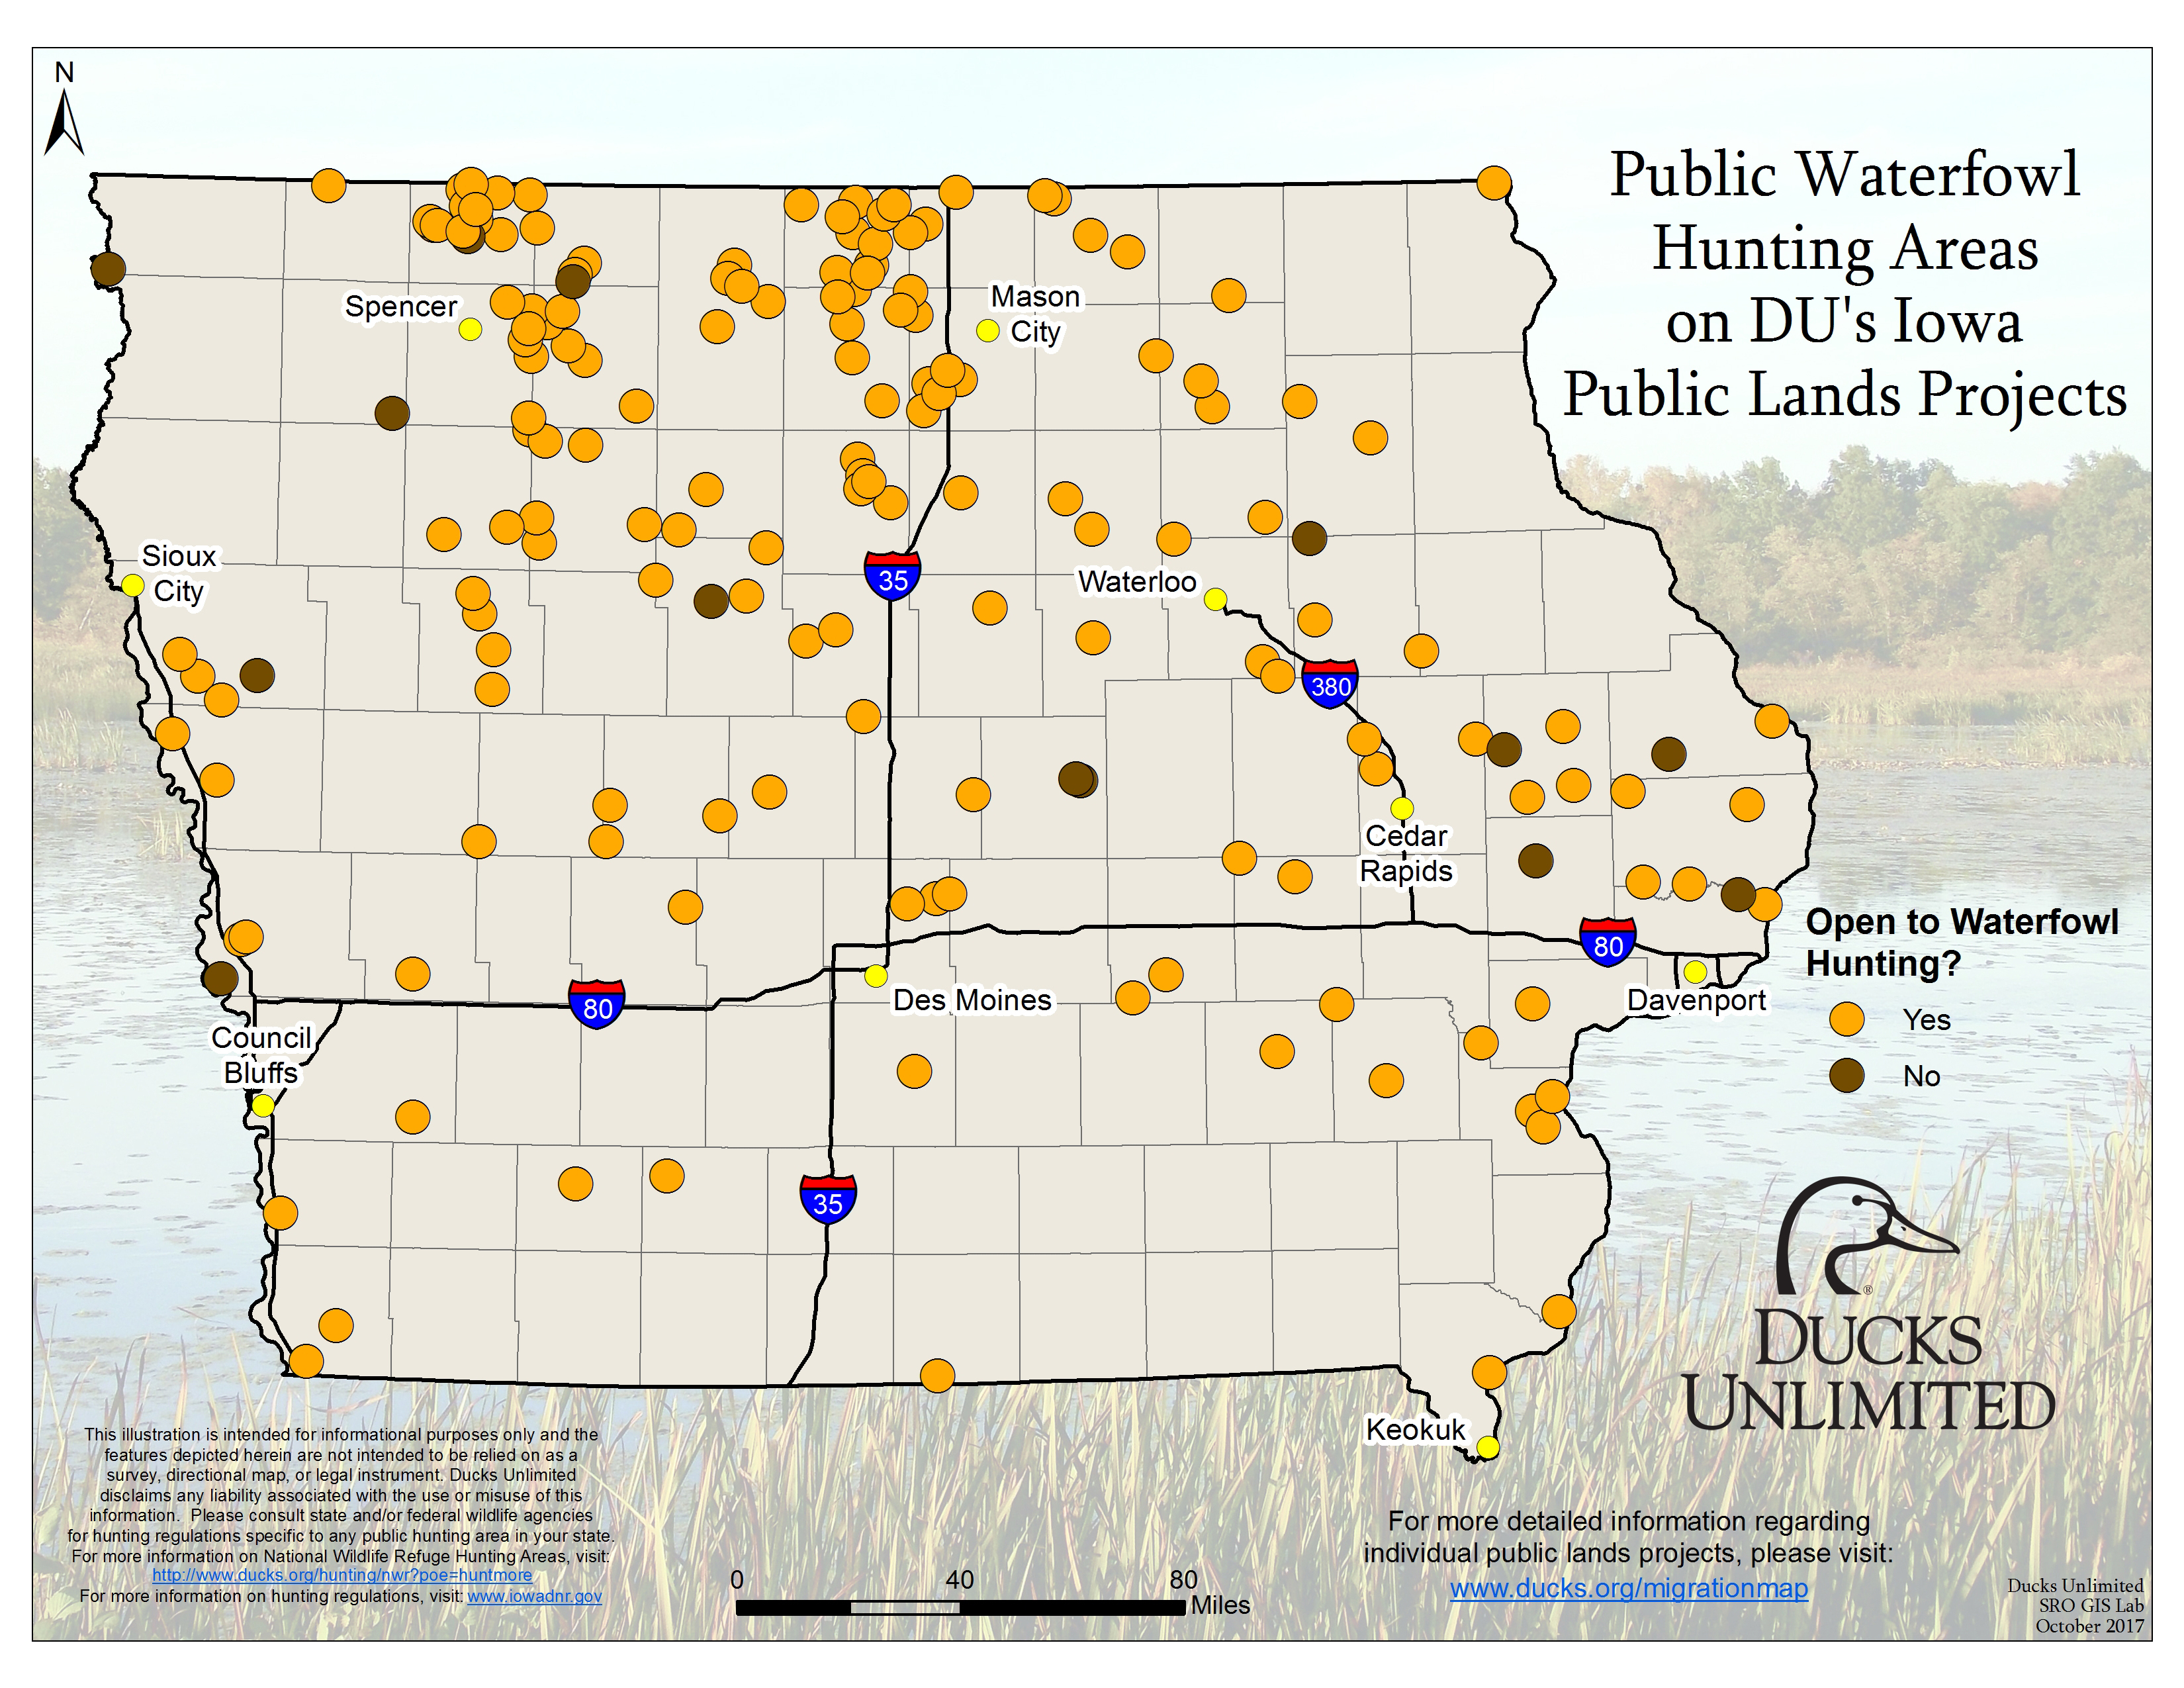 Public Waterfowl Hunting Areas On Du Public Lands Projects - Florida Public Hunting Map